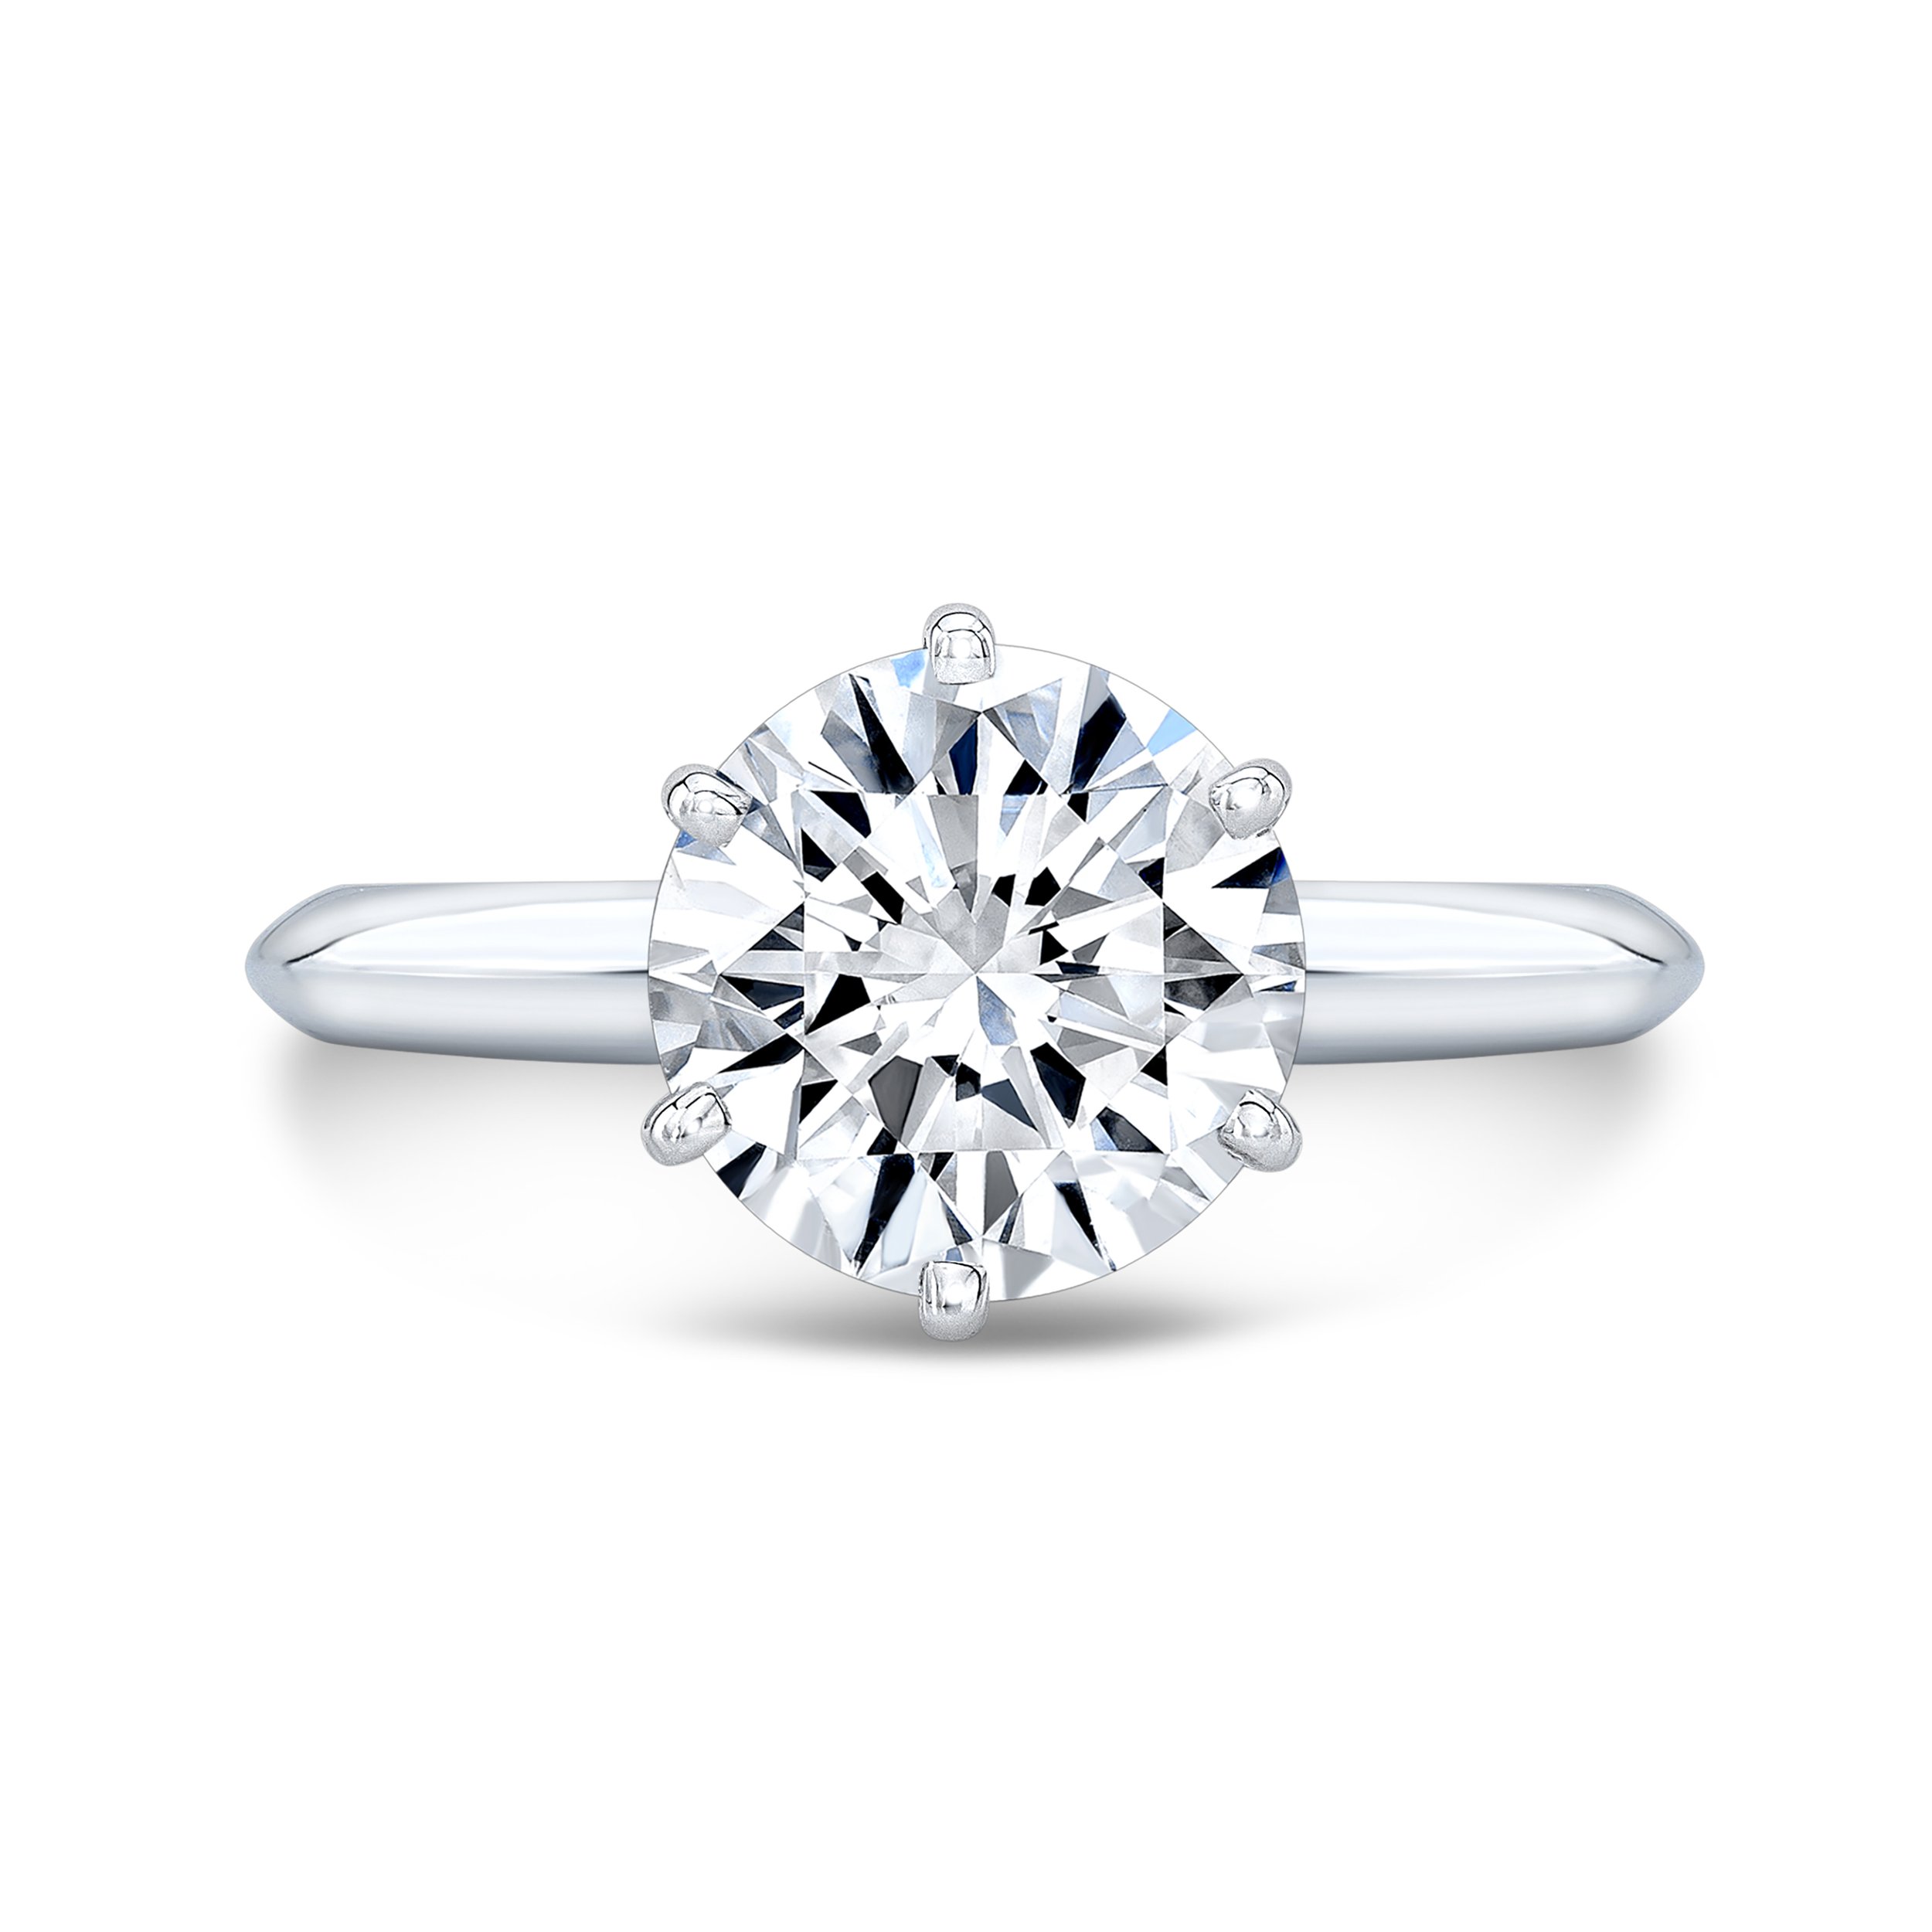 1573500246-Classic-Round-Cut-Knife-Edge-6-Prong-Solitaire-Diamond-Engagement-Ring-White-Gold-Platinum-Front-View.jpeg